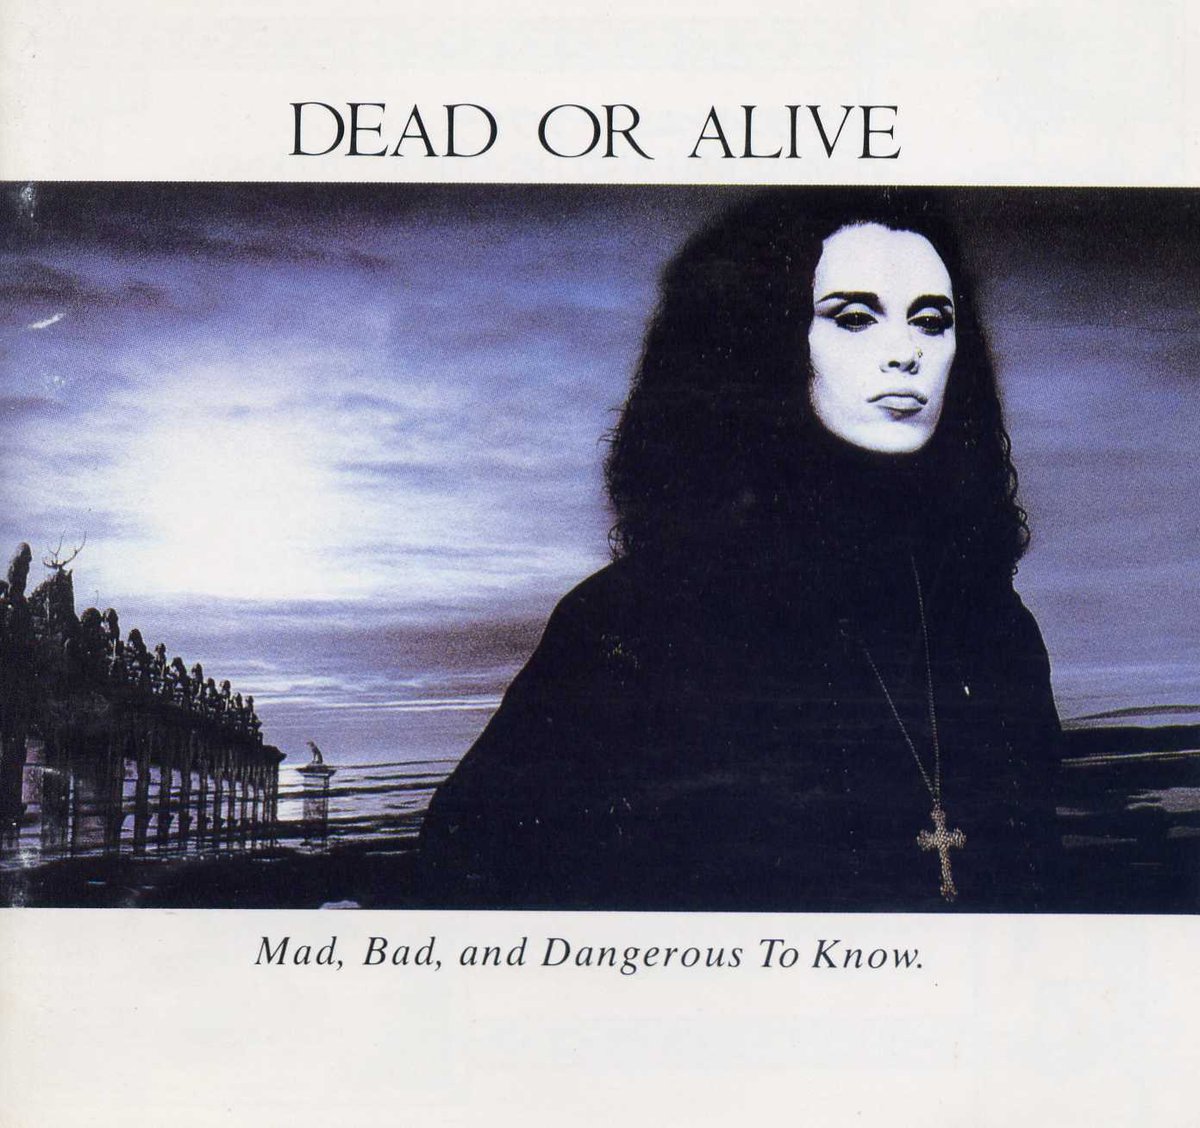 Day 20 : Dead Or Alive - Mad Bad And Dangerous To Know
Post a cover of an album that played an important role in your life, for the next 10,000 days. No review, no explanation. 
.
#synth #synthpop #parralox #classic #album 
#DeadOrAlive #MadBadAndDangerousToKnow #ComeInside